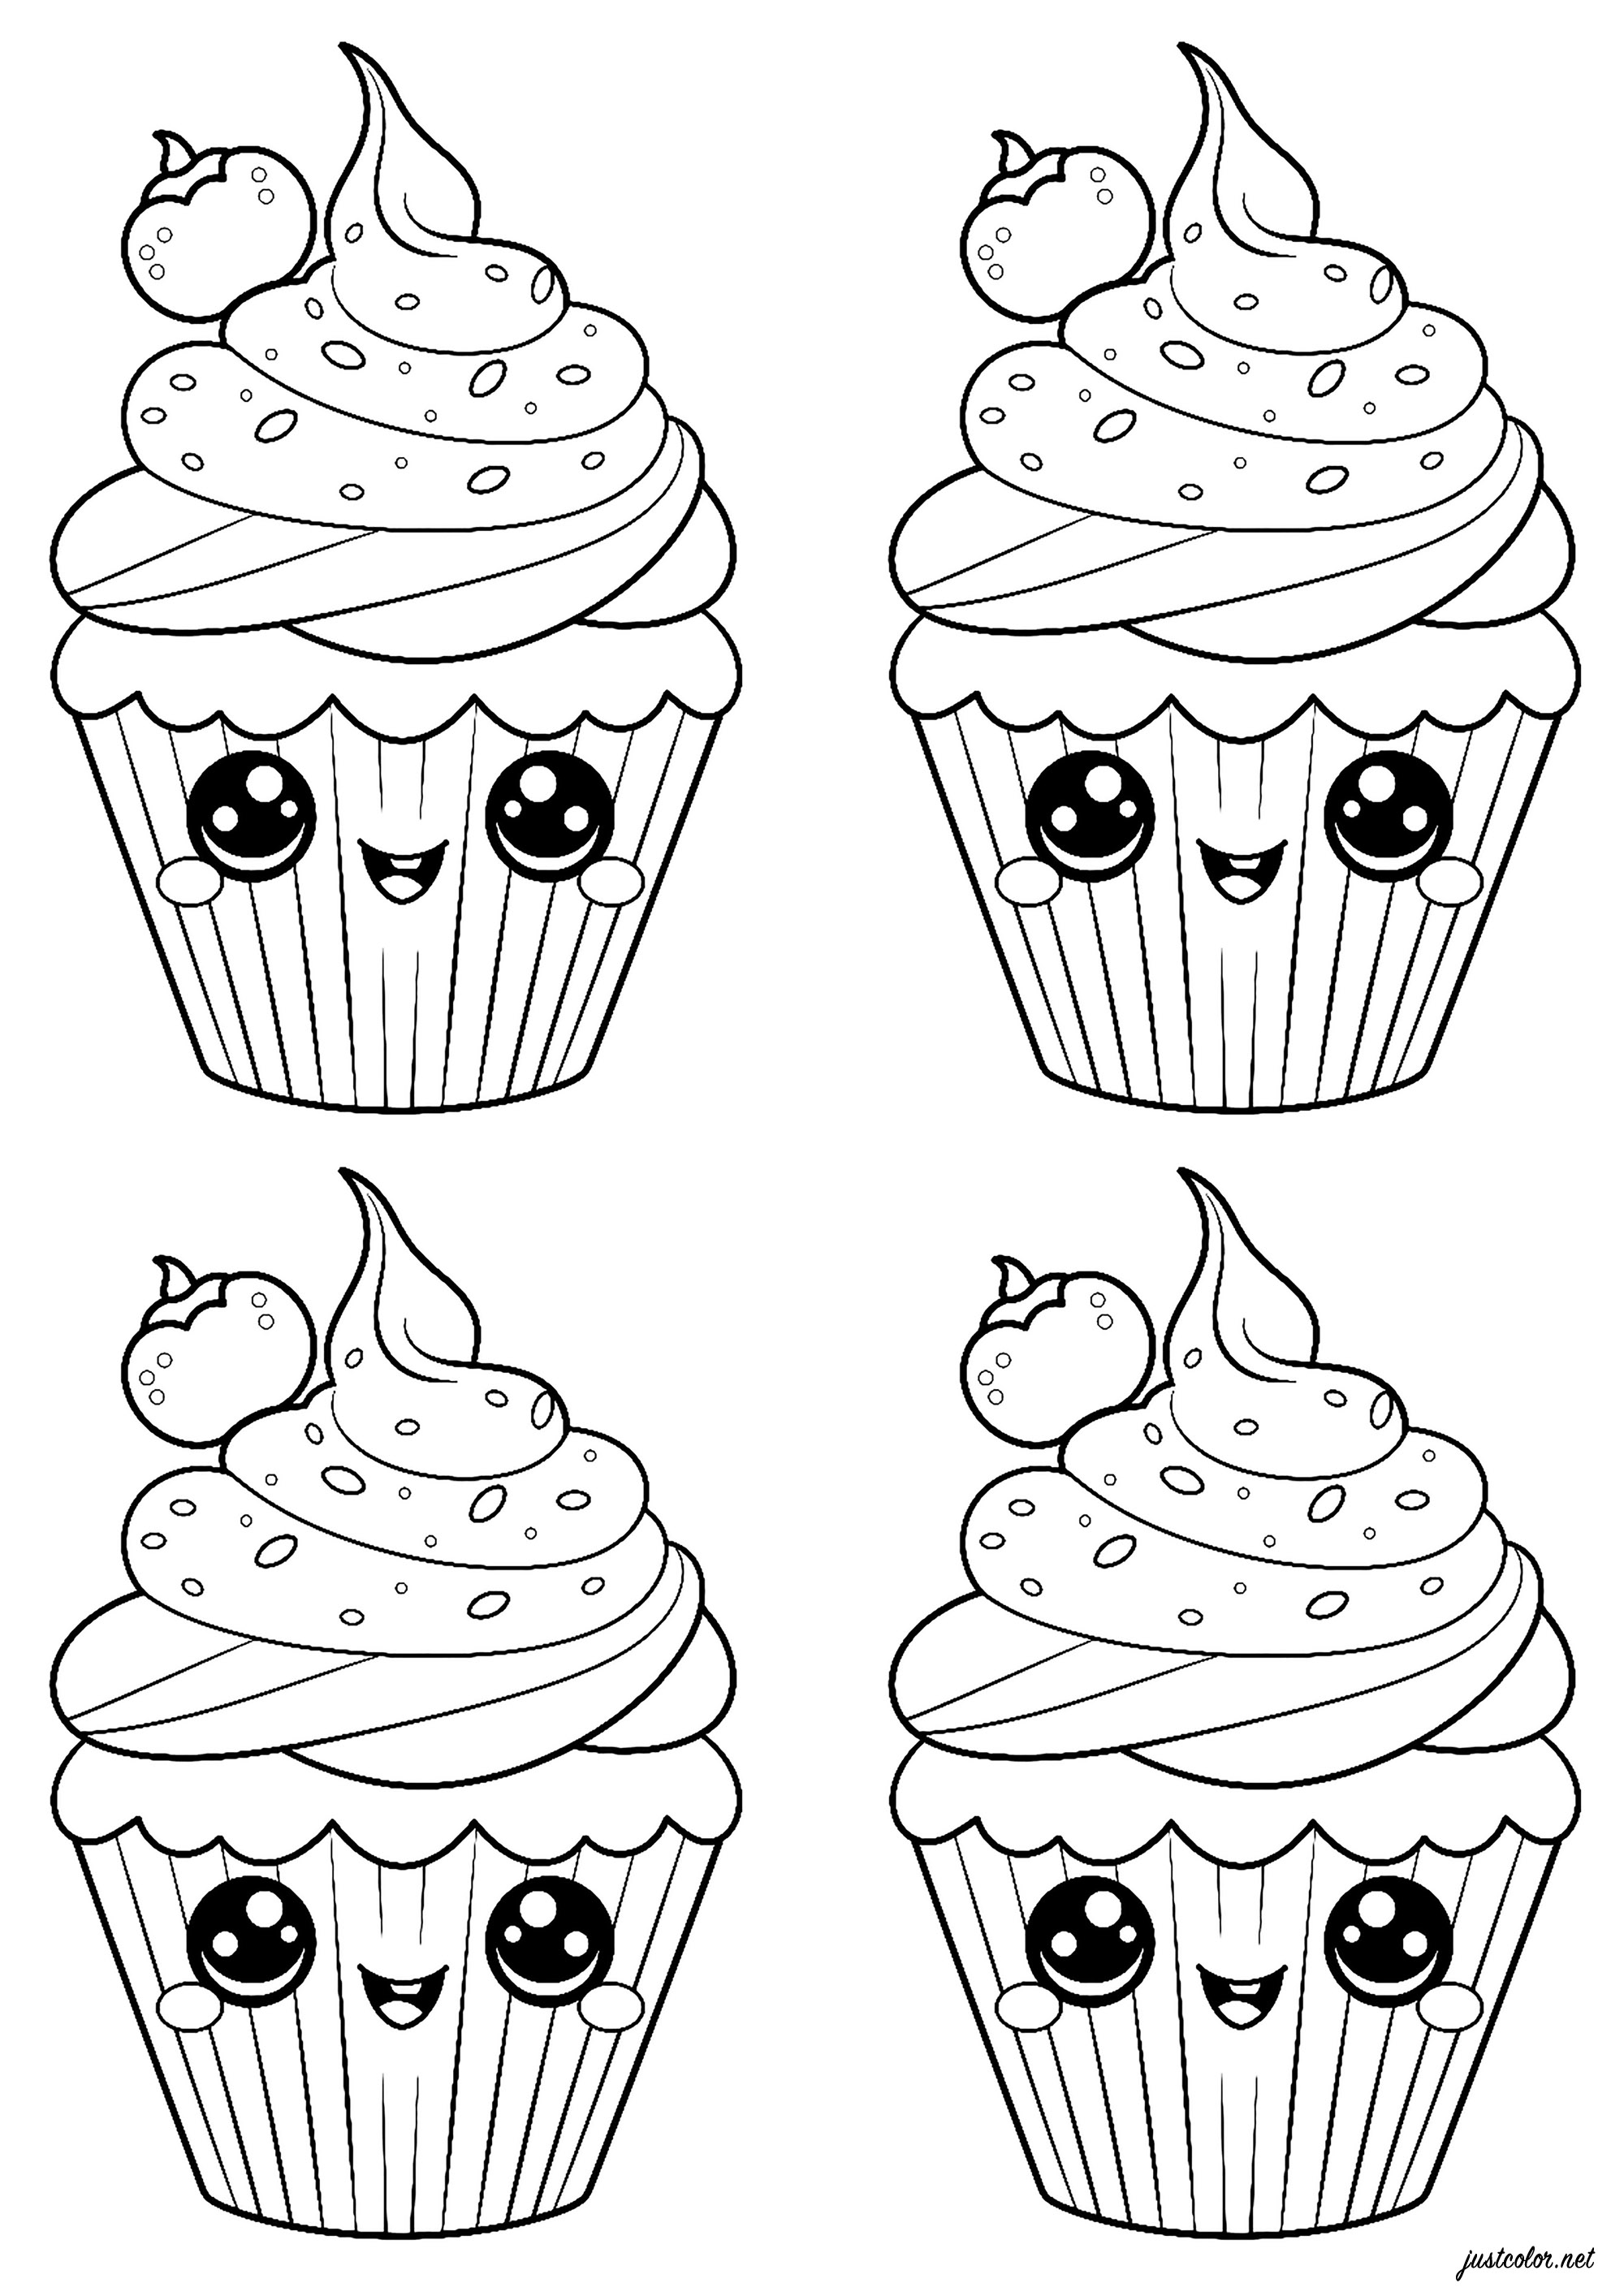 Four cute cupcakes. Color these pretty pastries